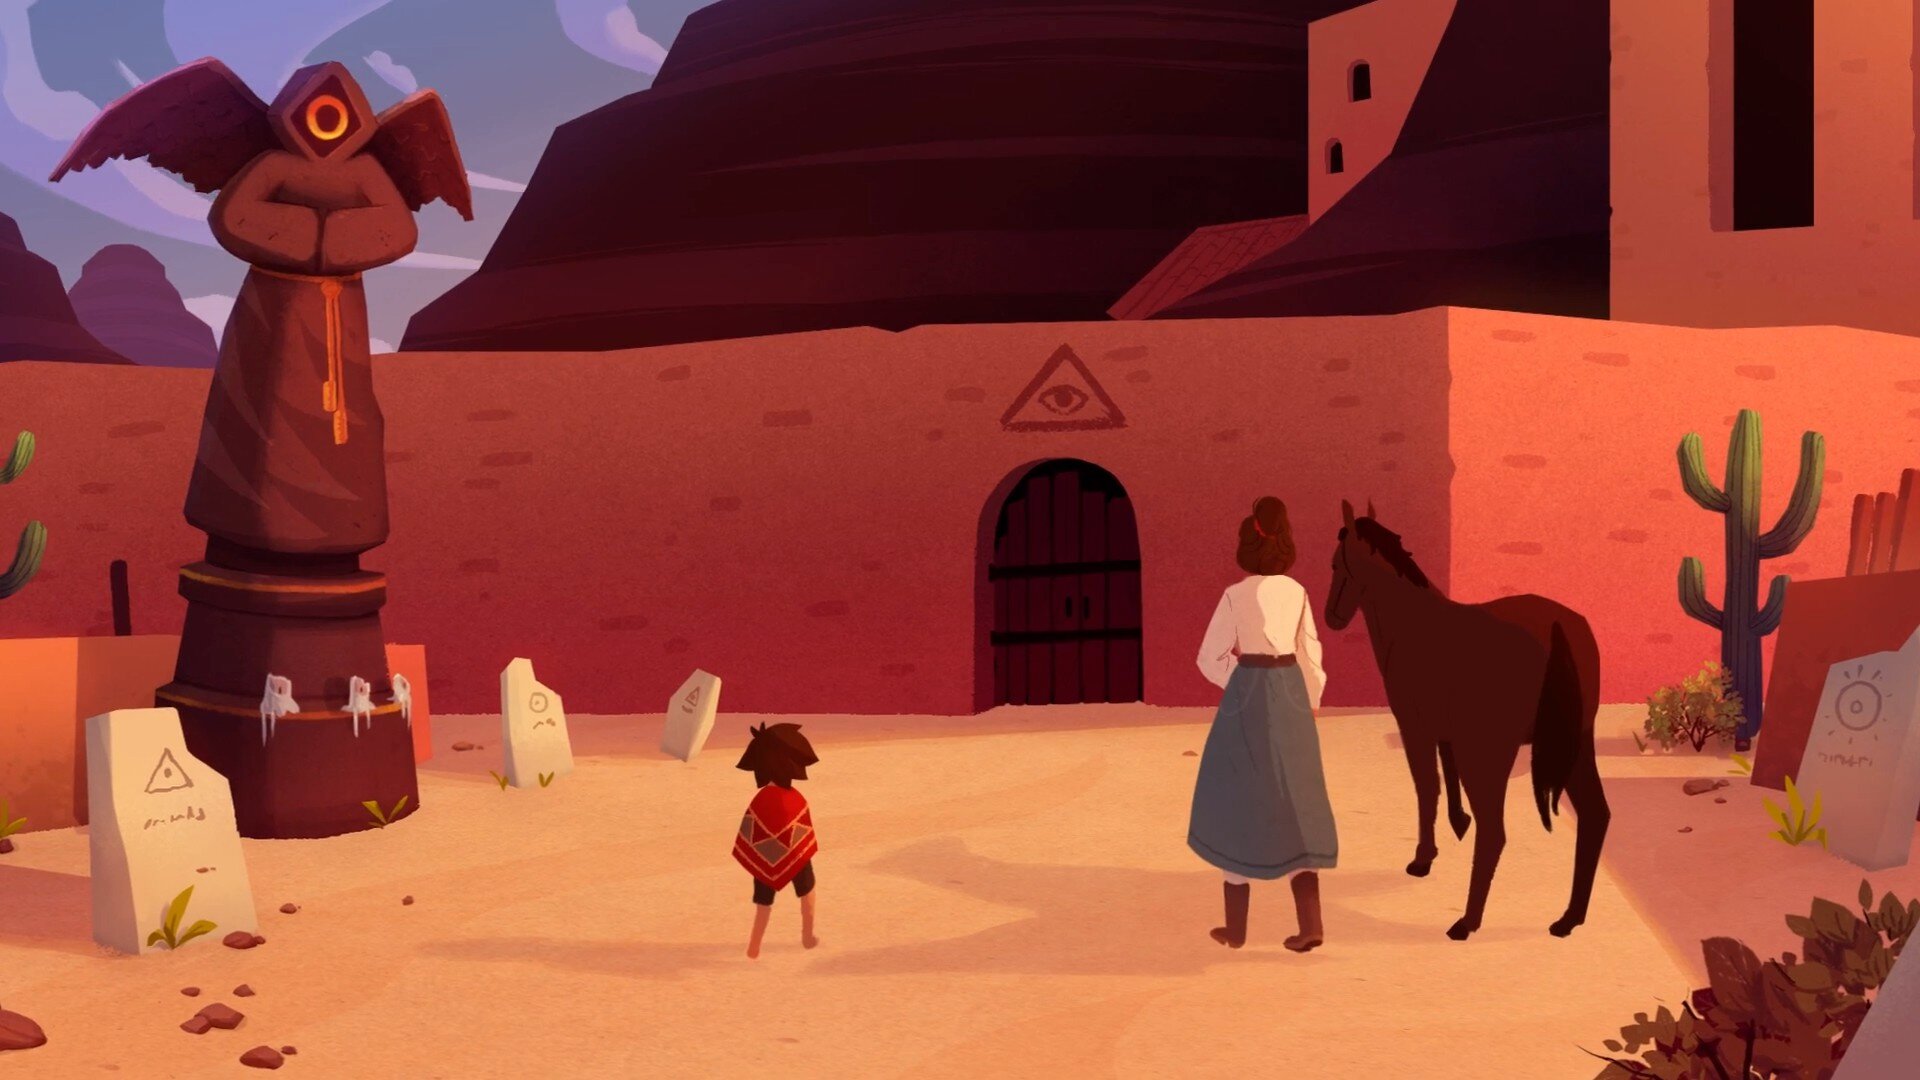 El Hijo - A Wild West Tale game screenshot, arriving at the monastery (cut-scene)